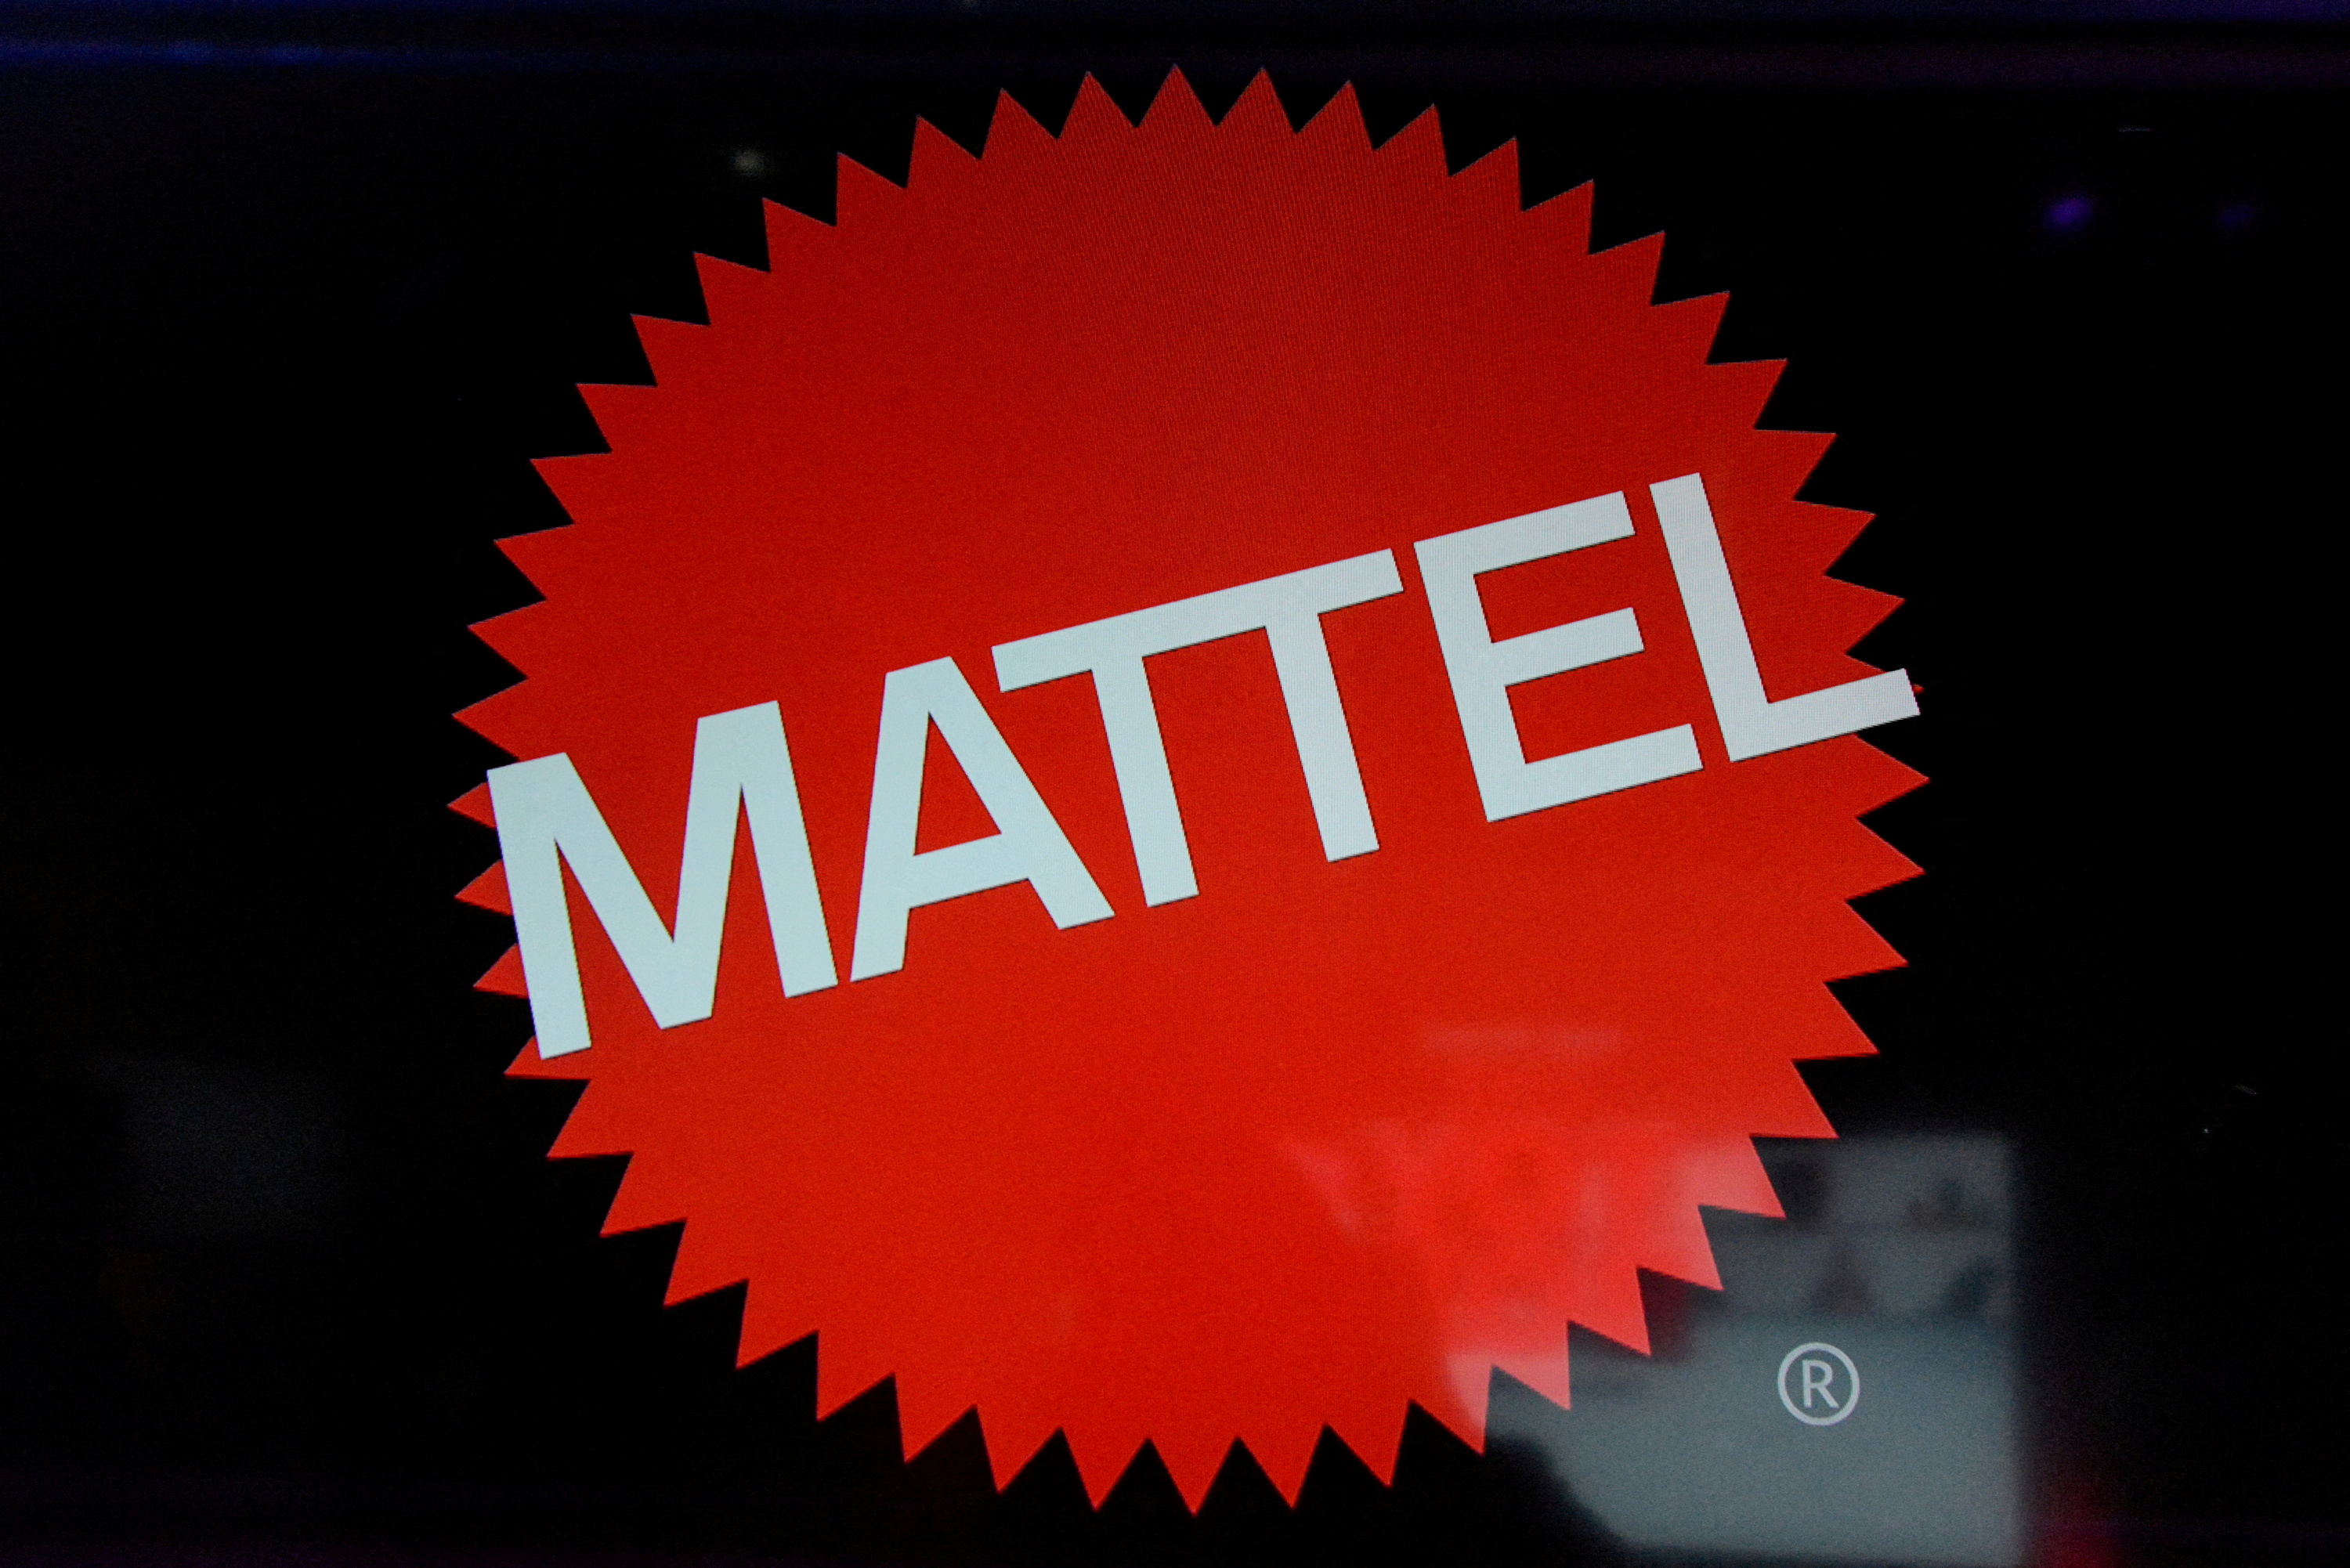 The Mattel company logo is seen at the 114th North American International Toy Fair in New York City